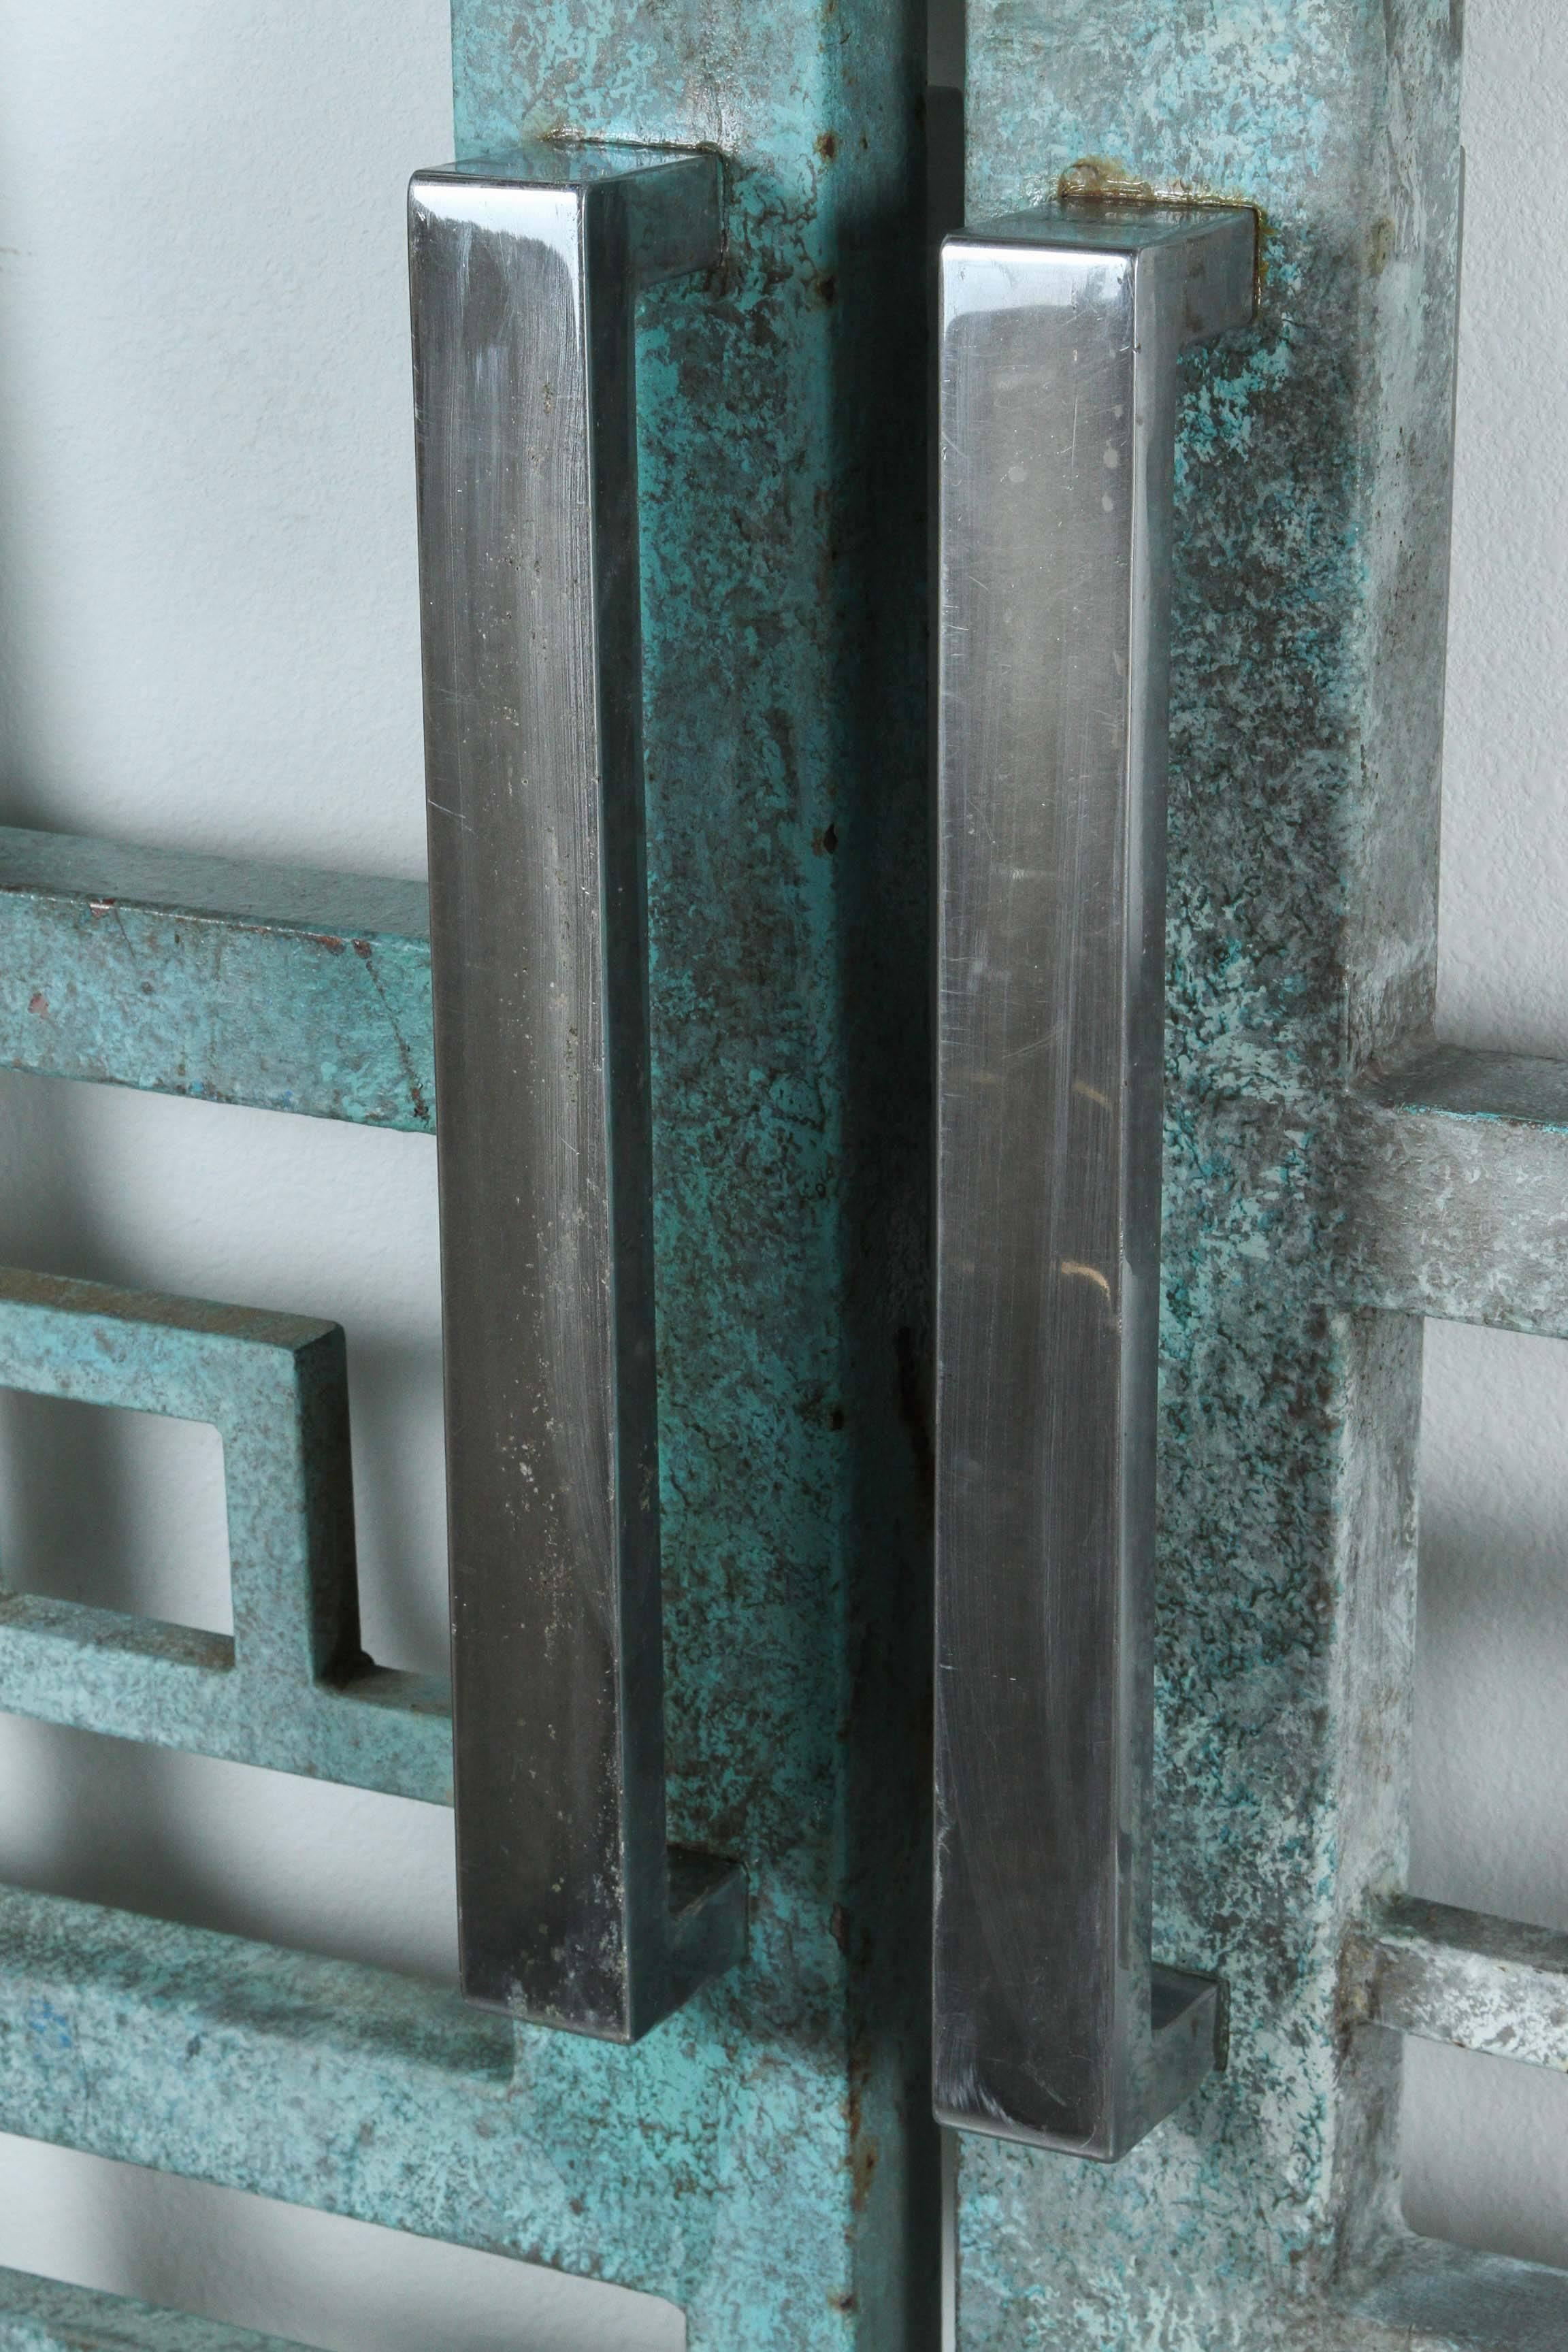 Spectacular pair of large heavy steel architectural gates with a geometric design
from a Palm Springs CA retail space. 
They have a wonderful verdigris finish and large chrome handles.